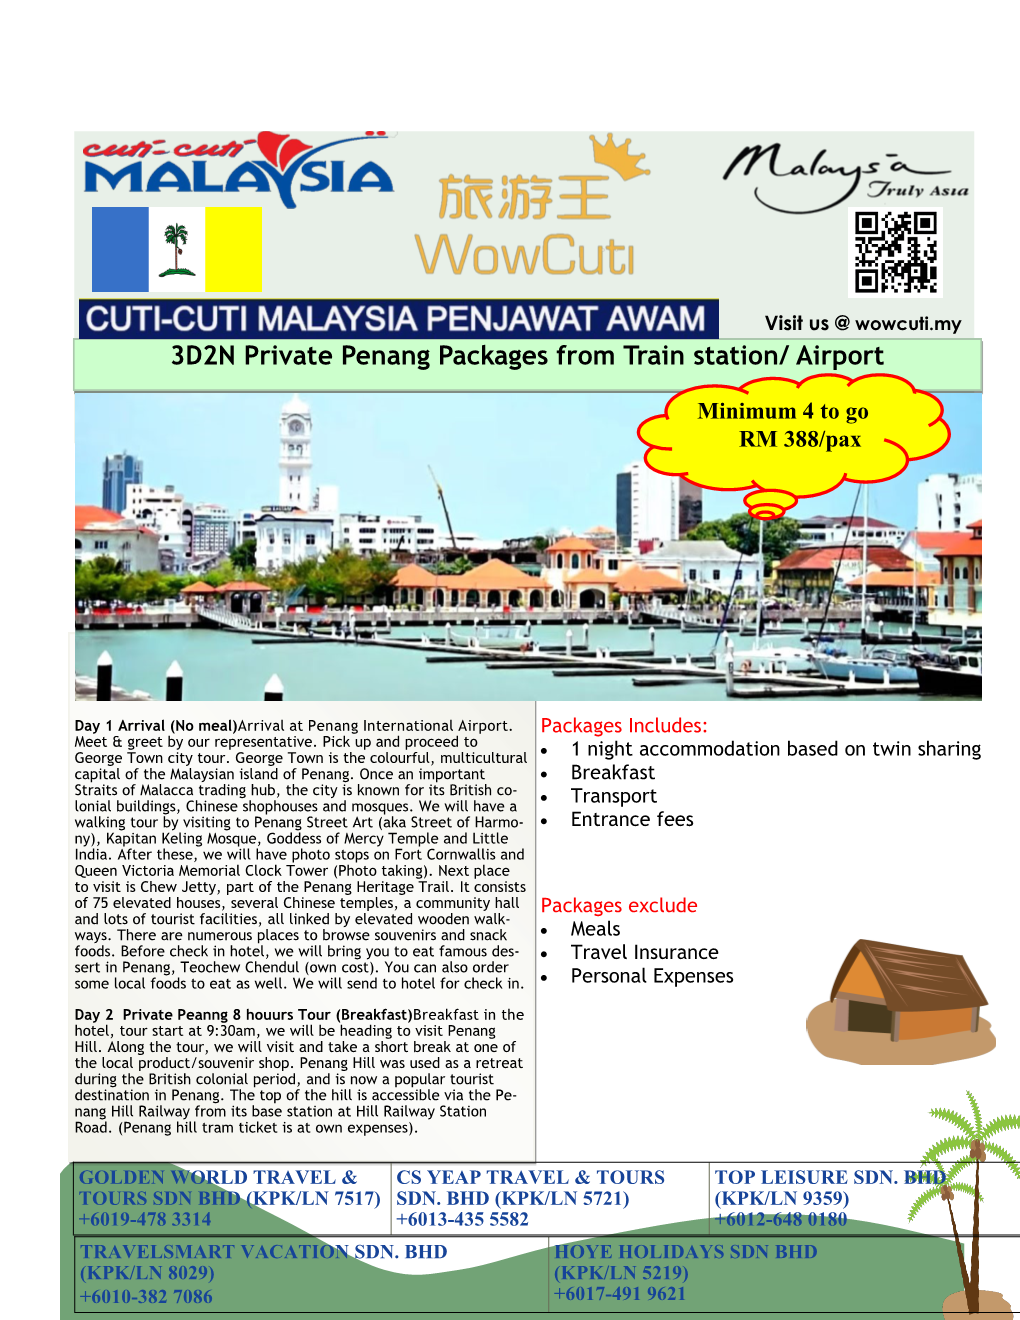 3D2N Private Penang Packages from Train Station/ Airport